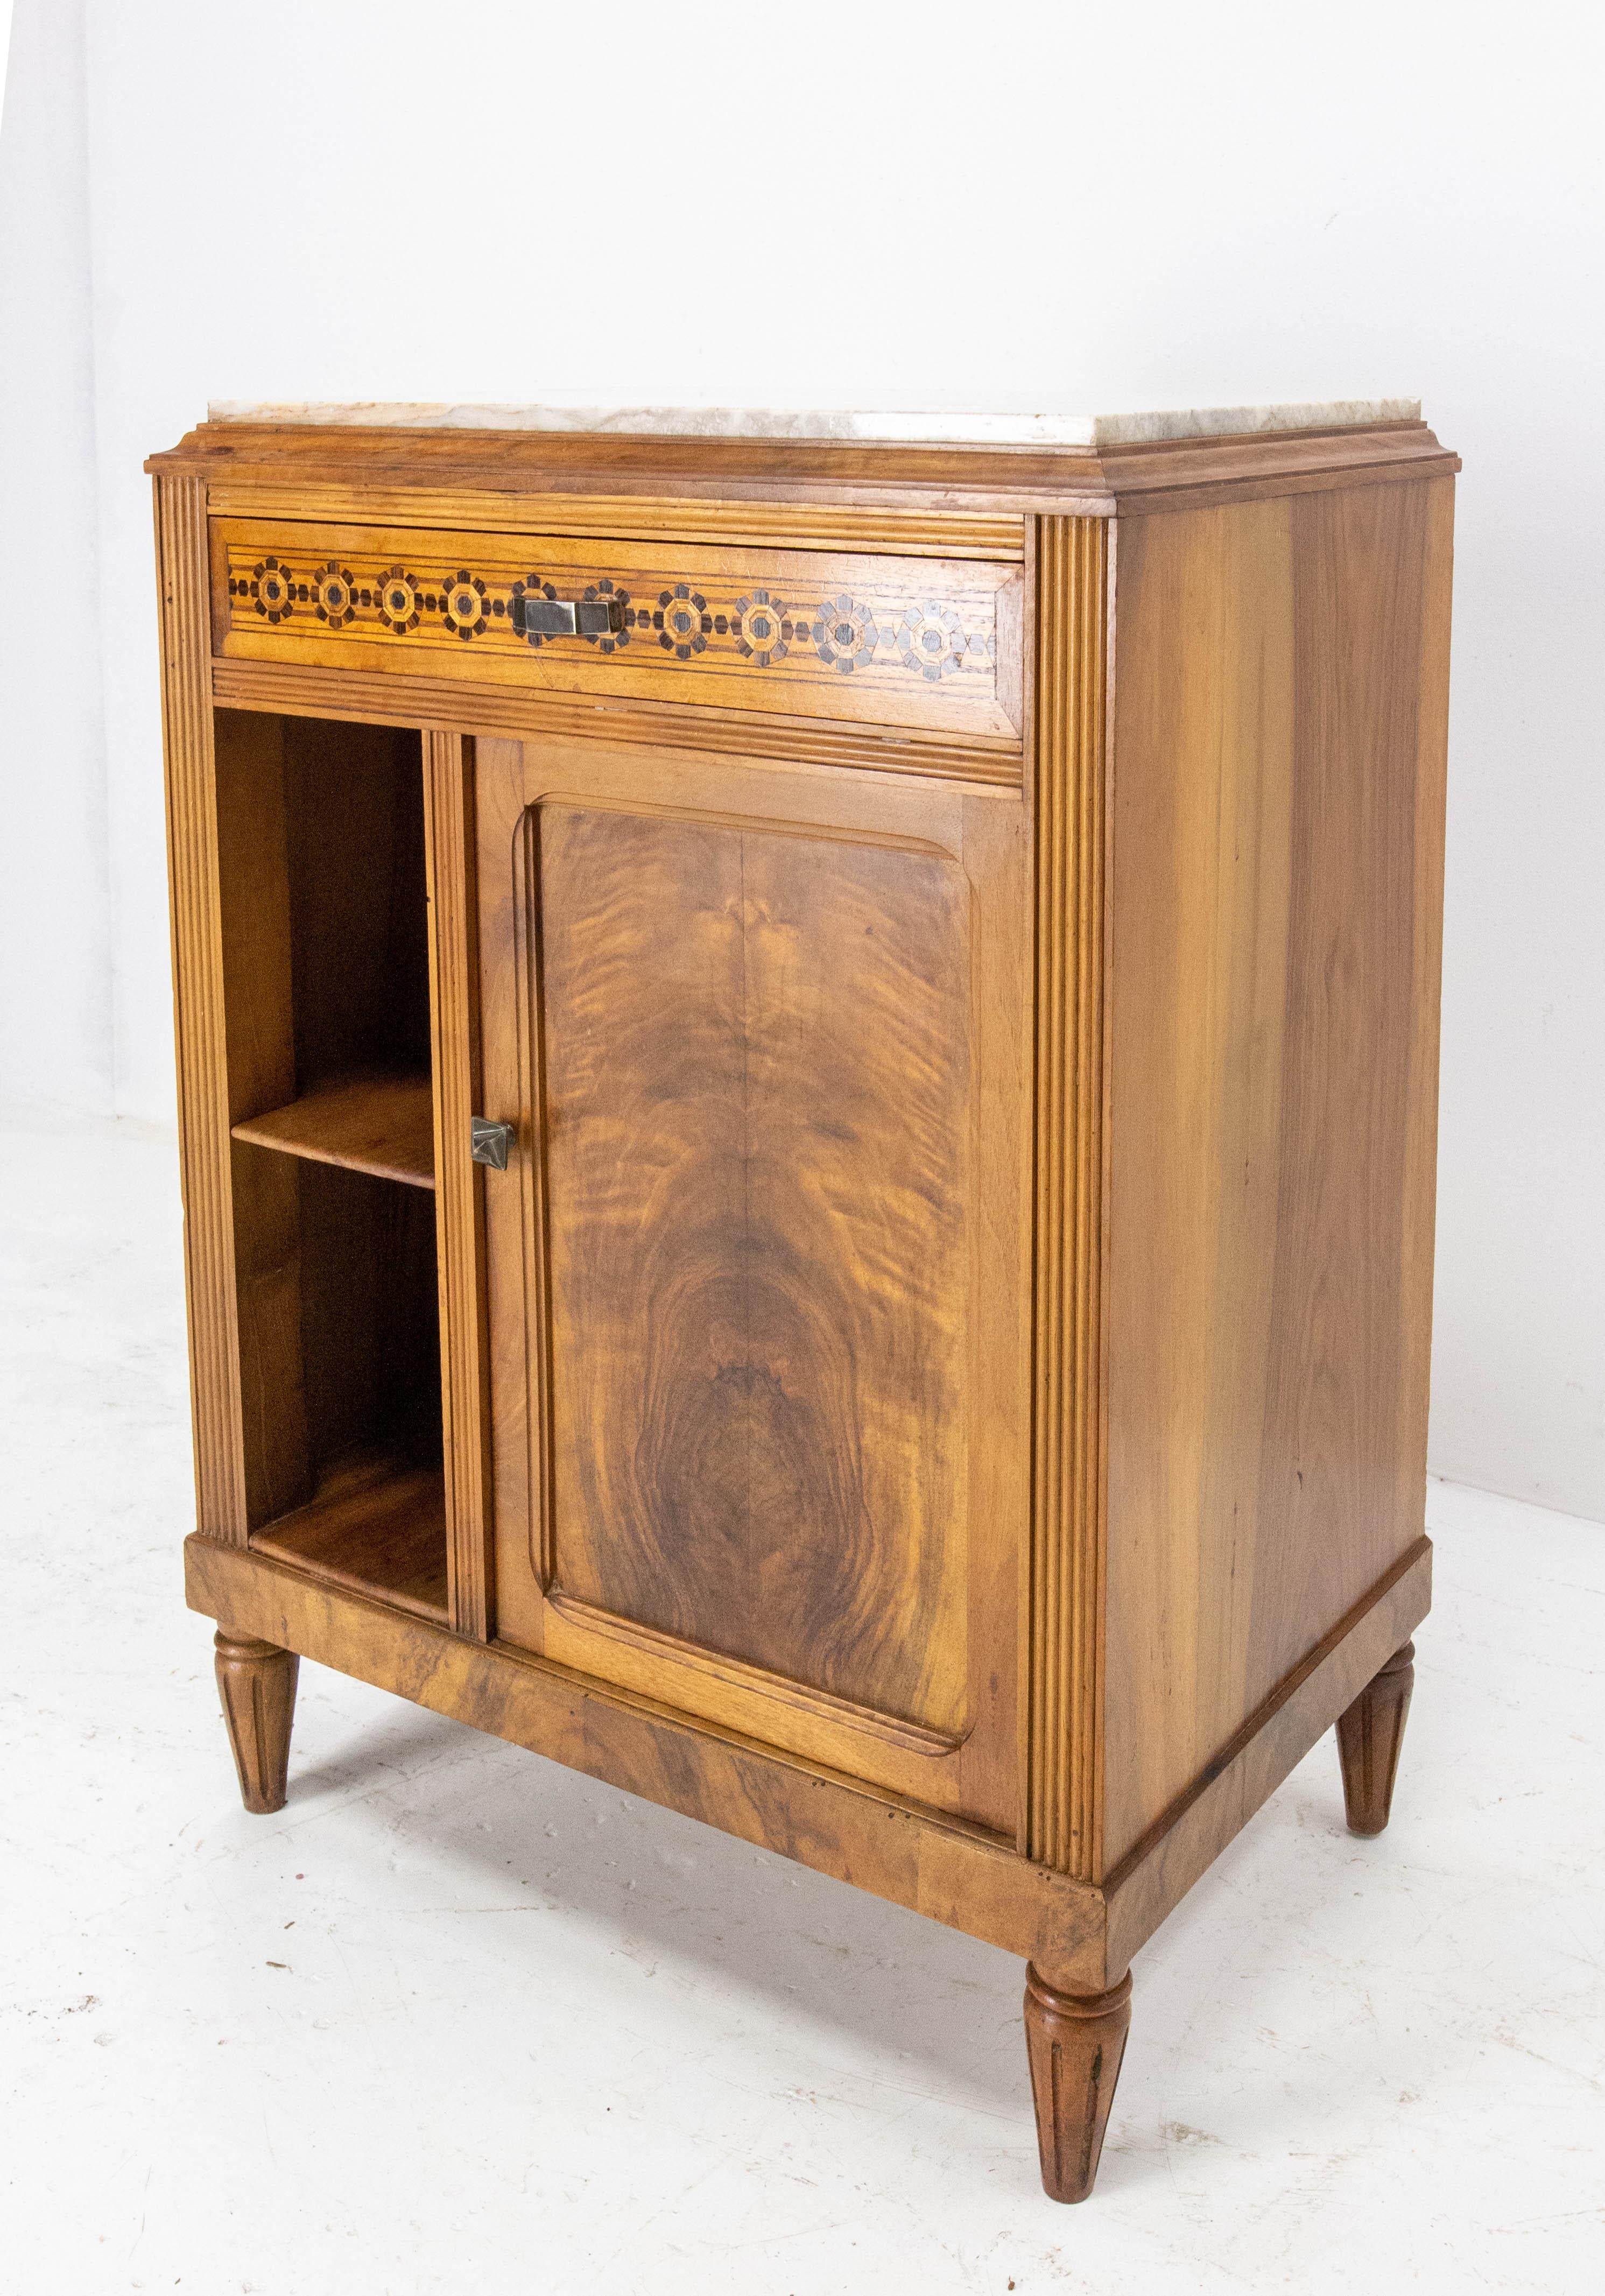 Art Deco side or end table, or bed side table,
Chestnut and marble
One drawer, one door and one open part
Marquetry on the drawer
French 1930
Good condition

Shipping:
L55.5 P38 H78 cm 24kg.
 